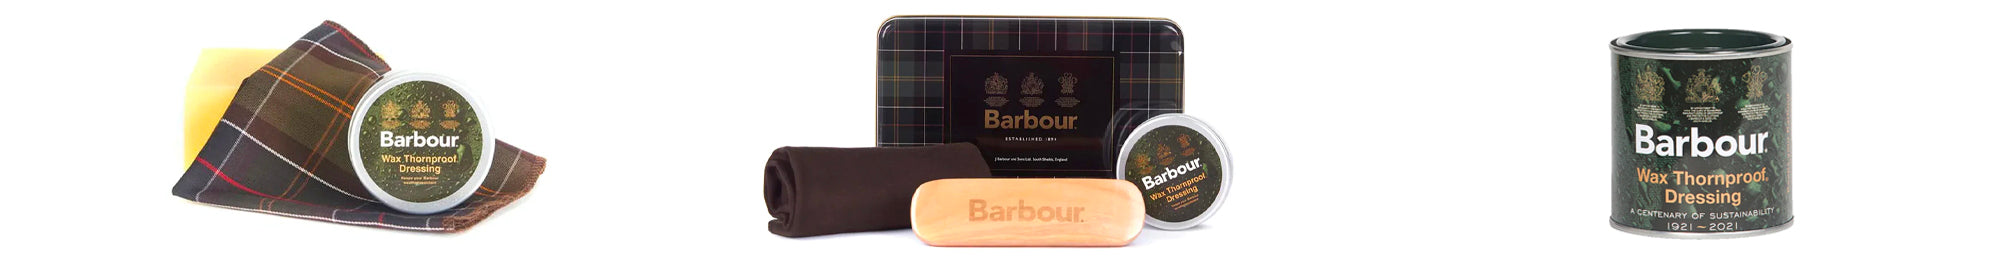 BARBOUR WAX JACKET CARE KIT